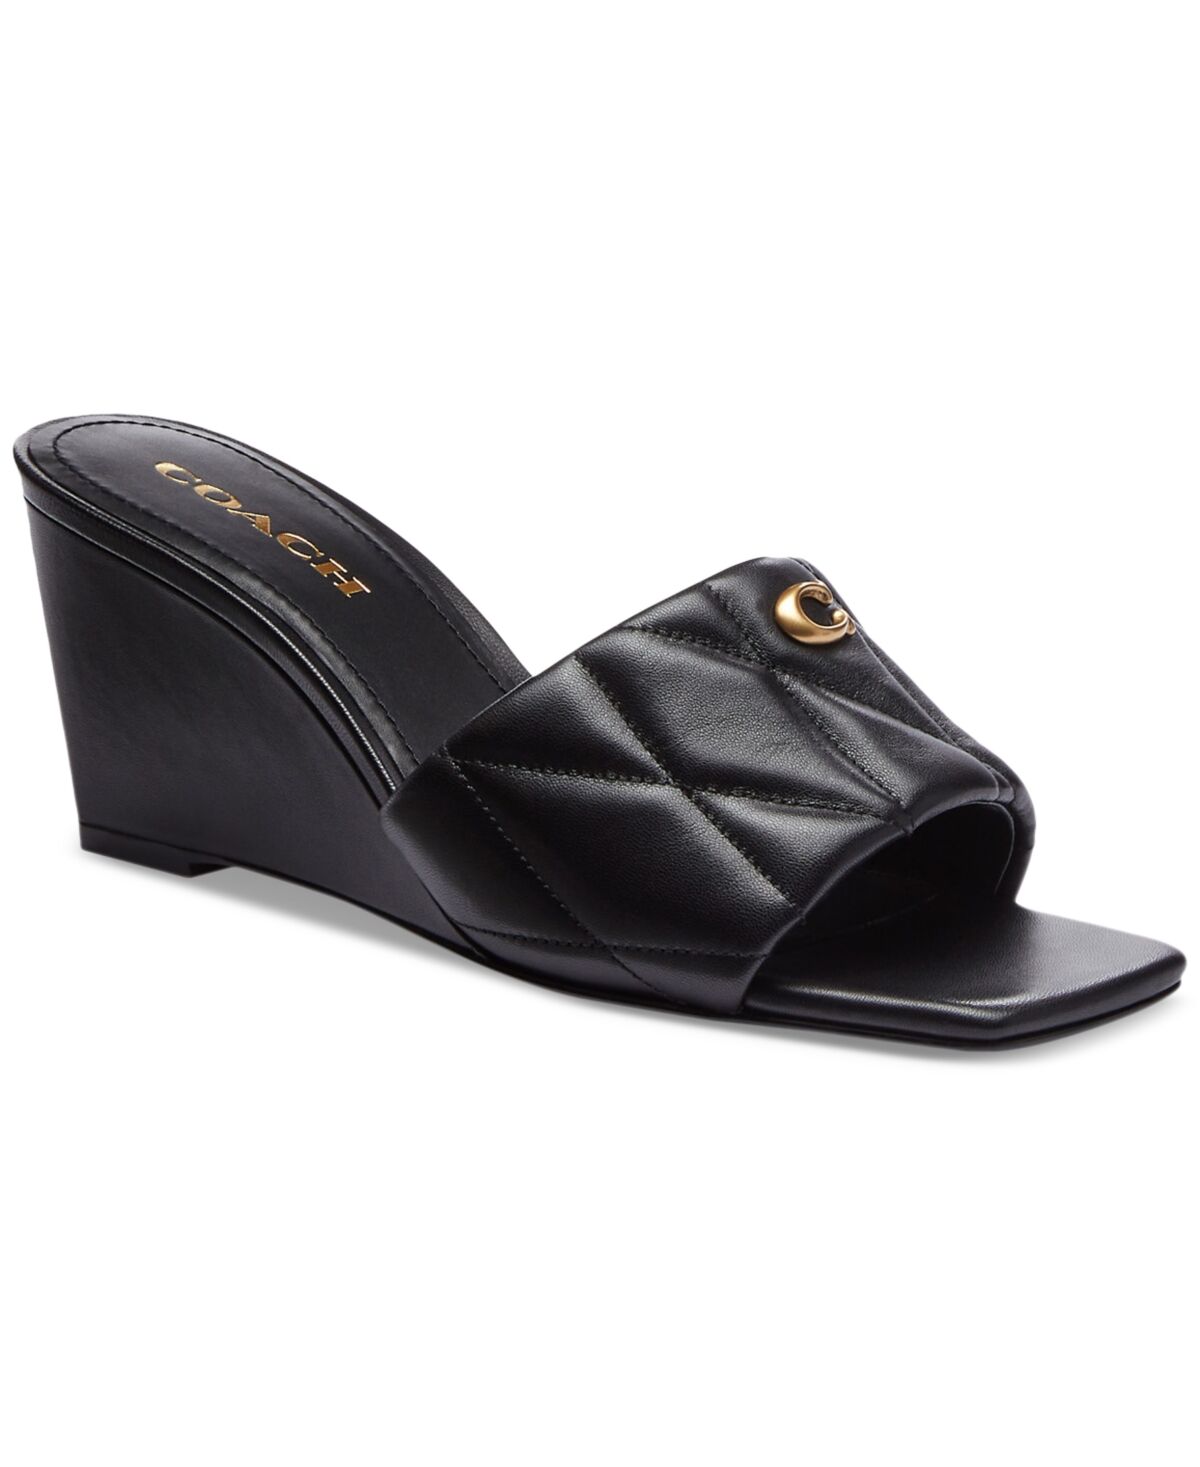 Coach Women's Emma Quilted Wedge Sandals - Black Quilted Leather